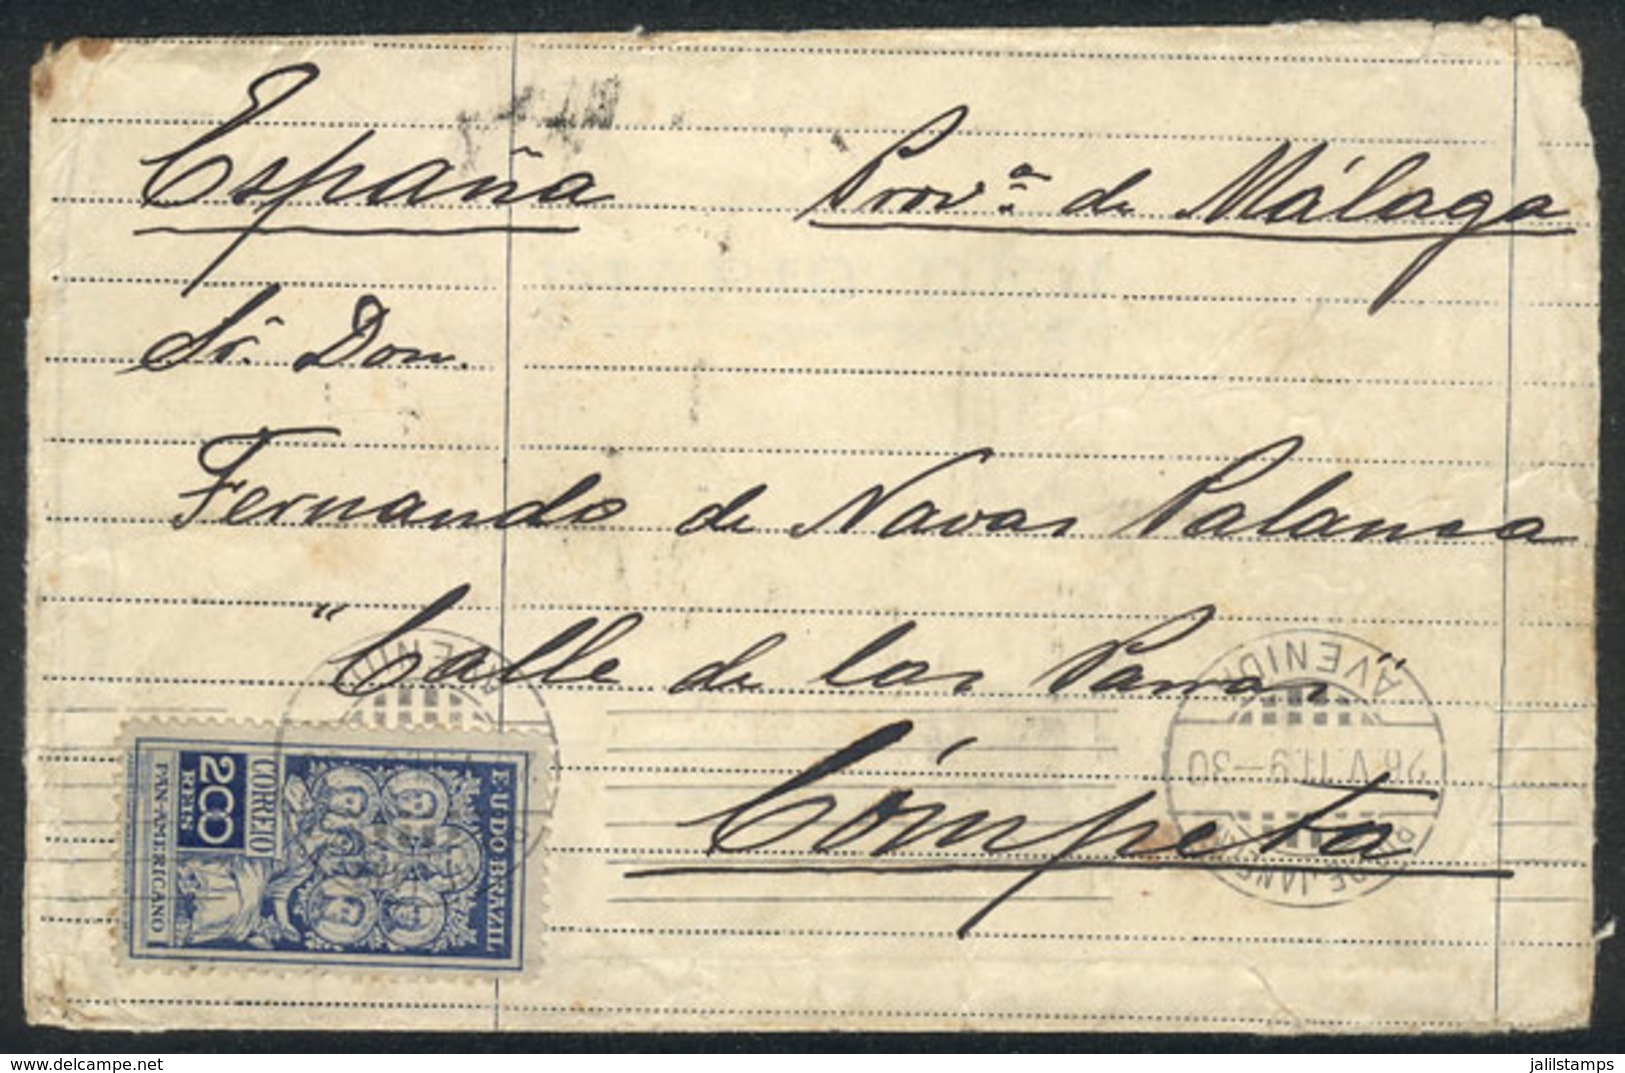 BRAZIL: Cover Franked By RHM.C-9 ALONE, Sent From Rio To Spain On 26/MAY/1911, VF Quality, Catalgo Value 380Rs. - Cartes-maximum